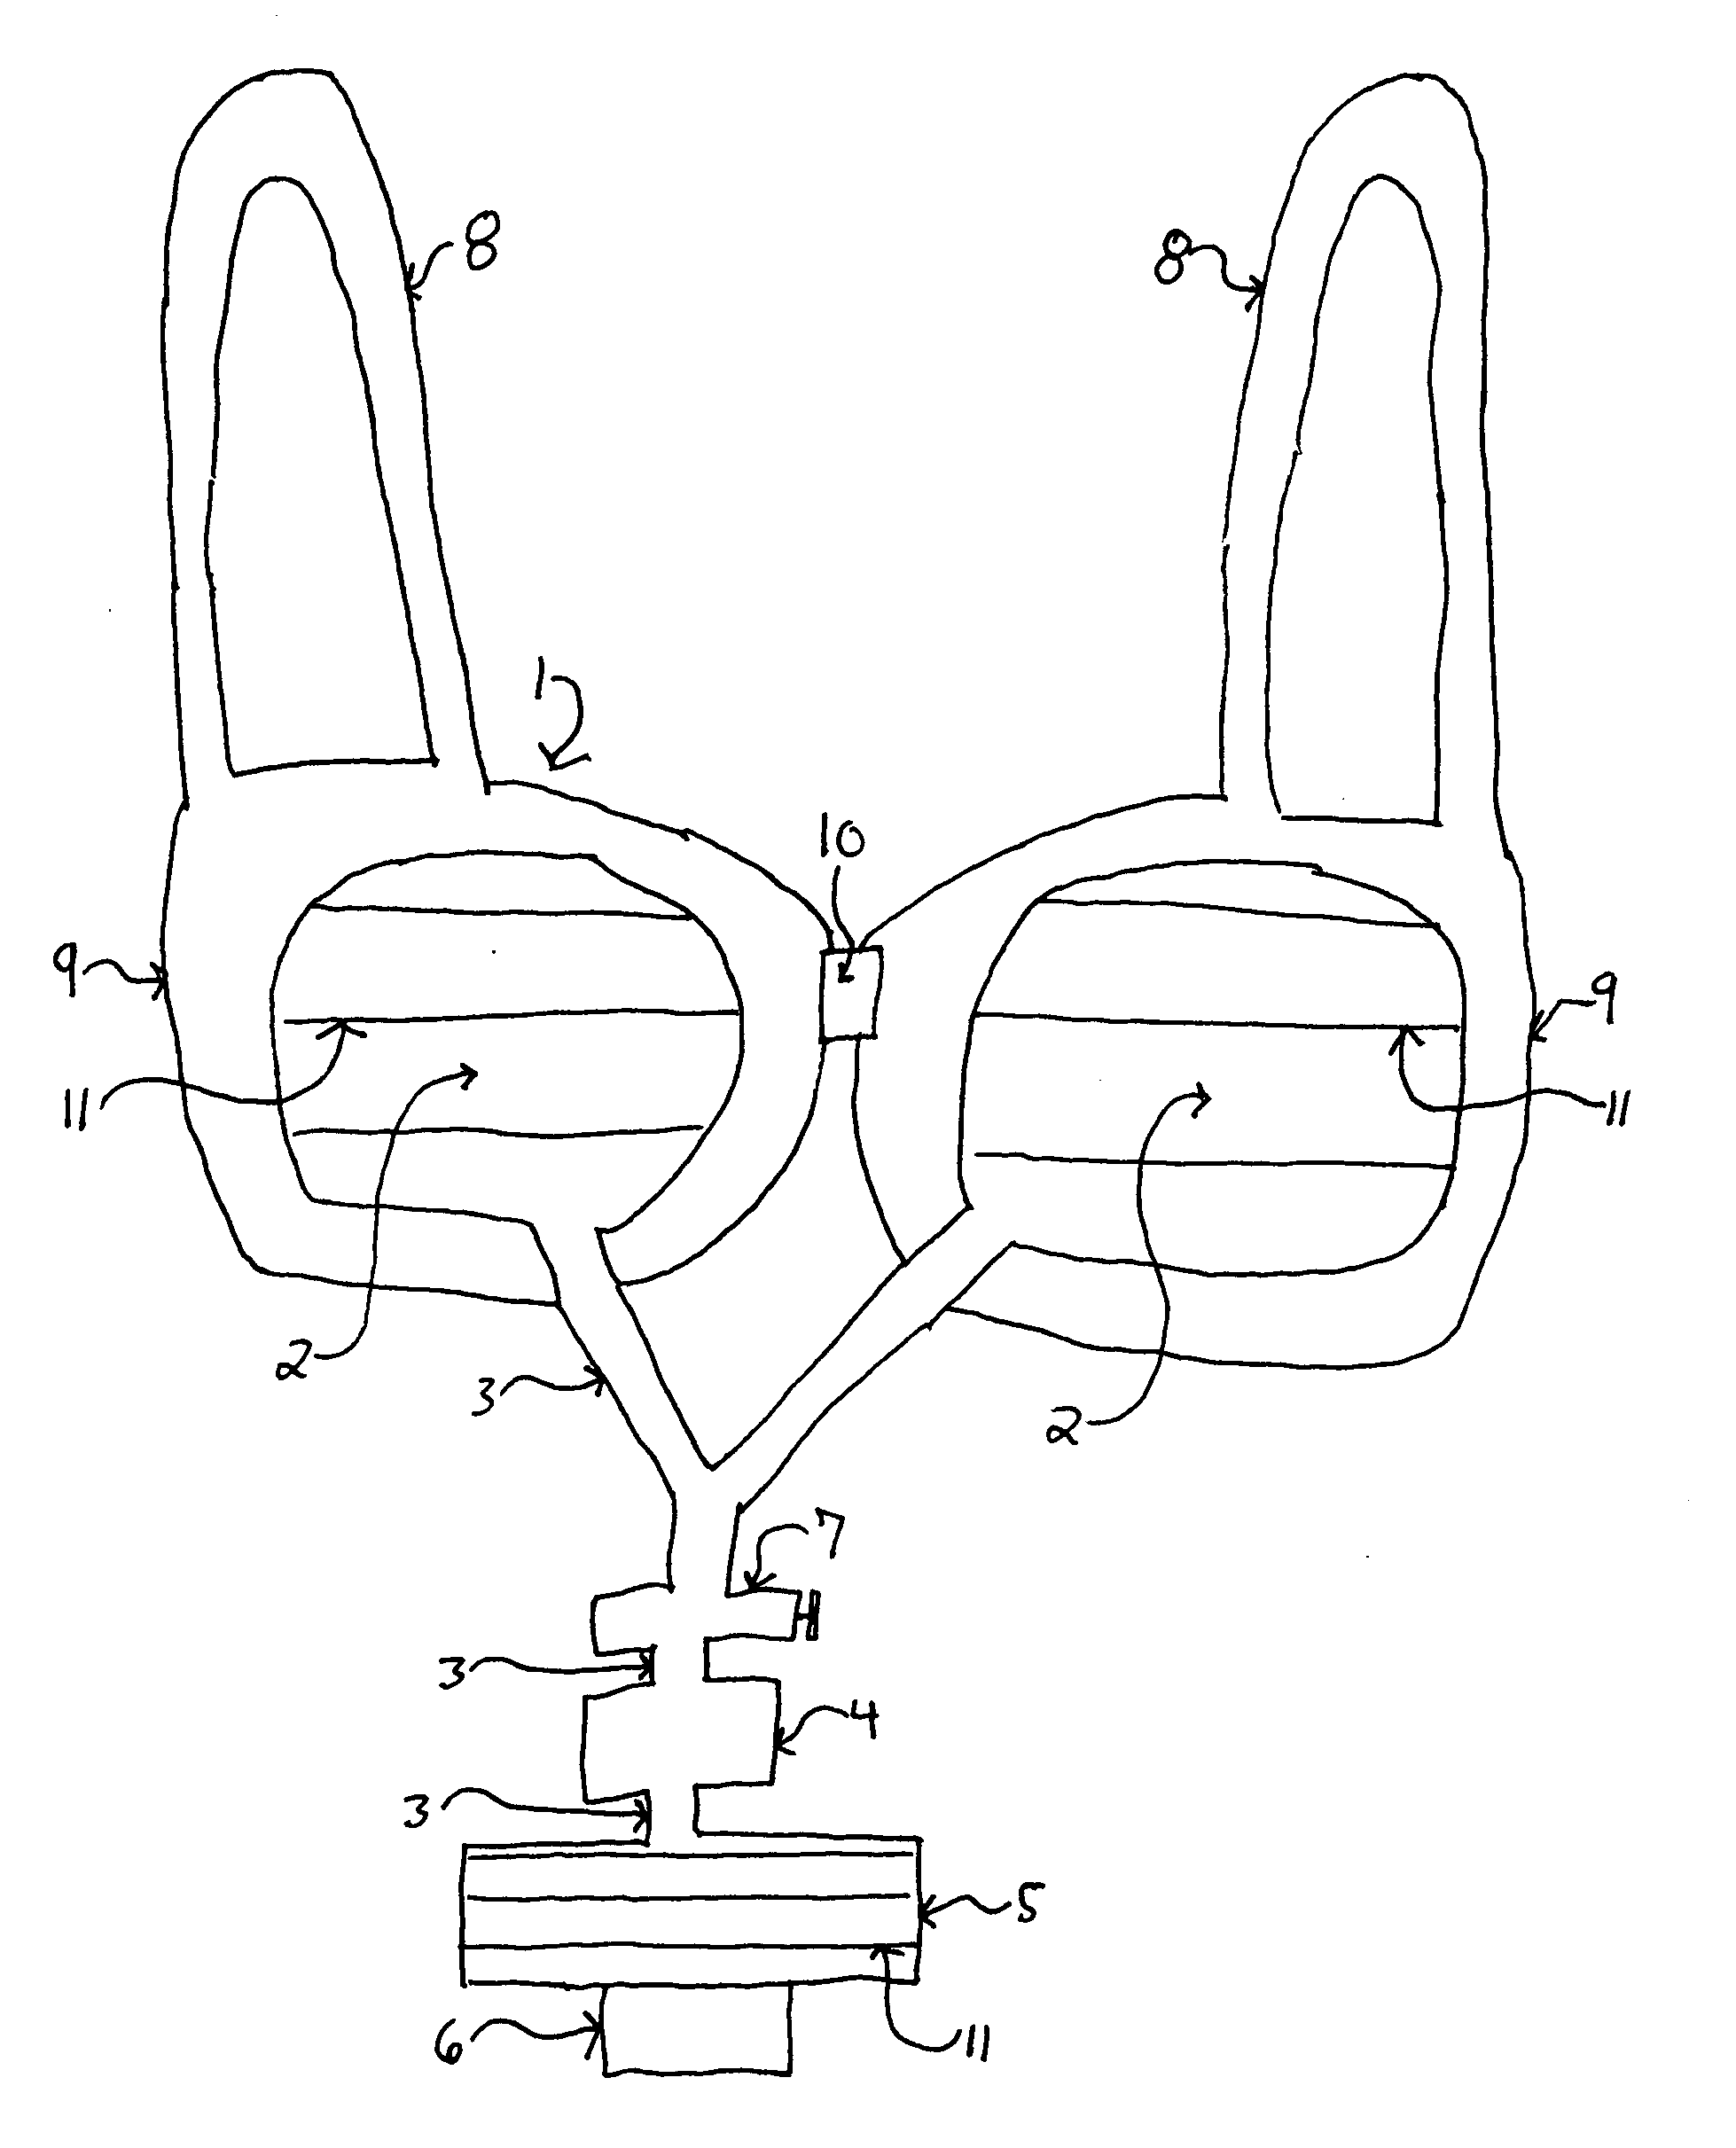 Method and apparatus for preoperative estimation of breast implant volume